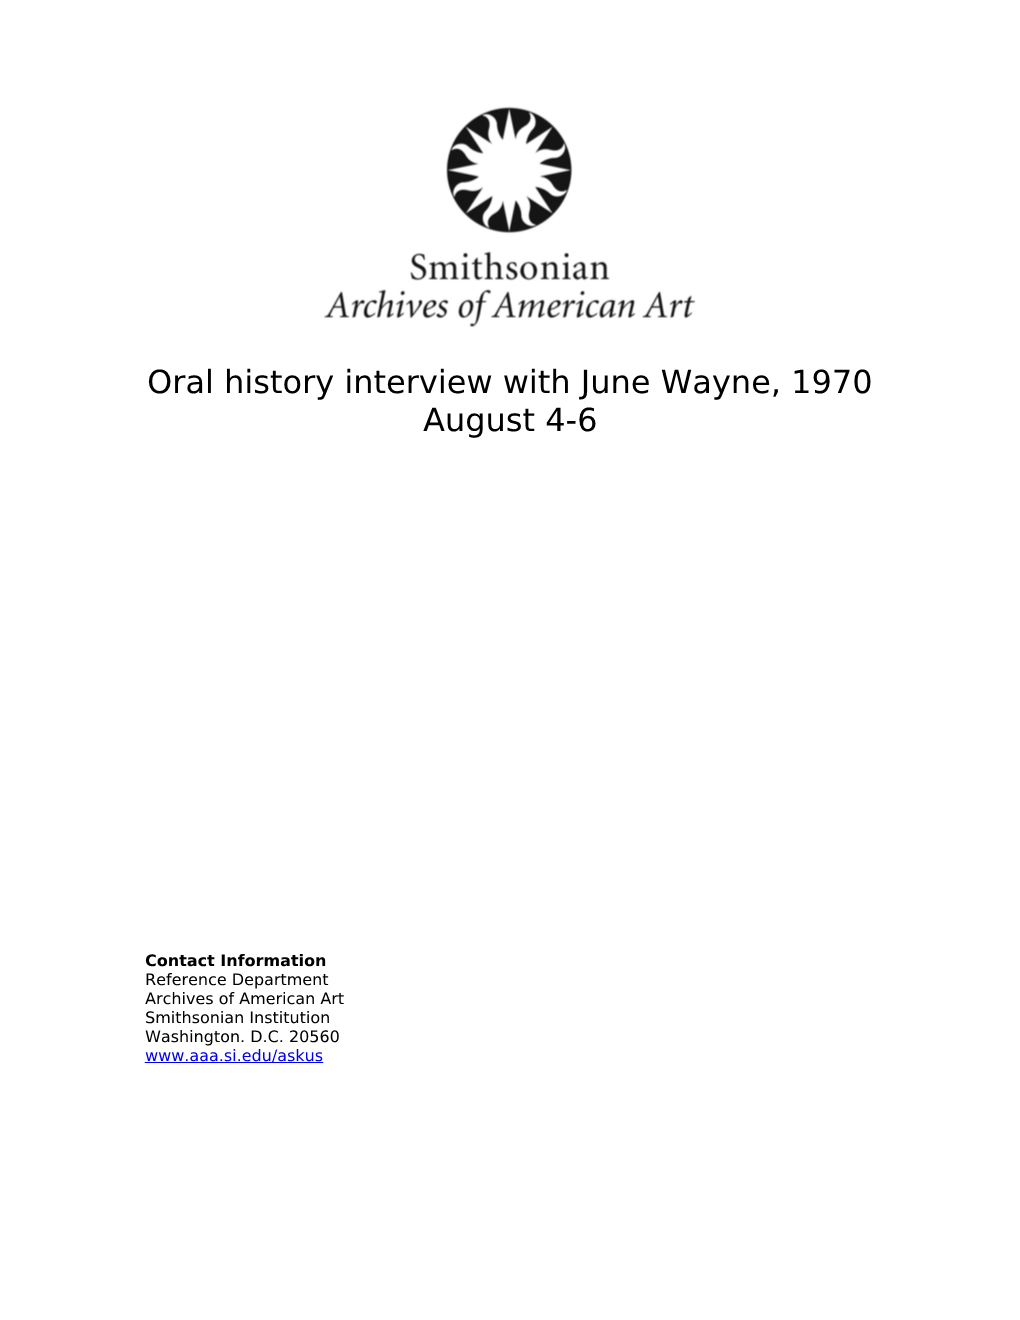 Oral History Interview with June Wayne, 1970 August 4-6